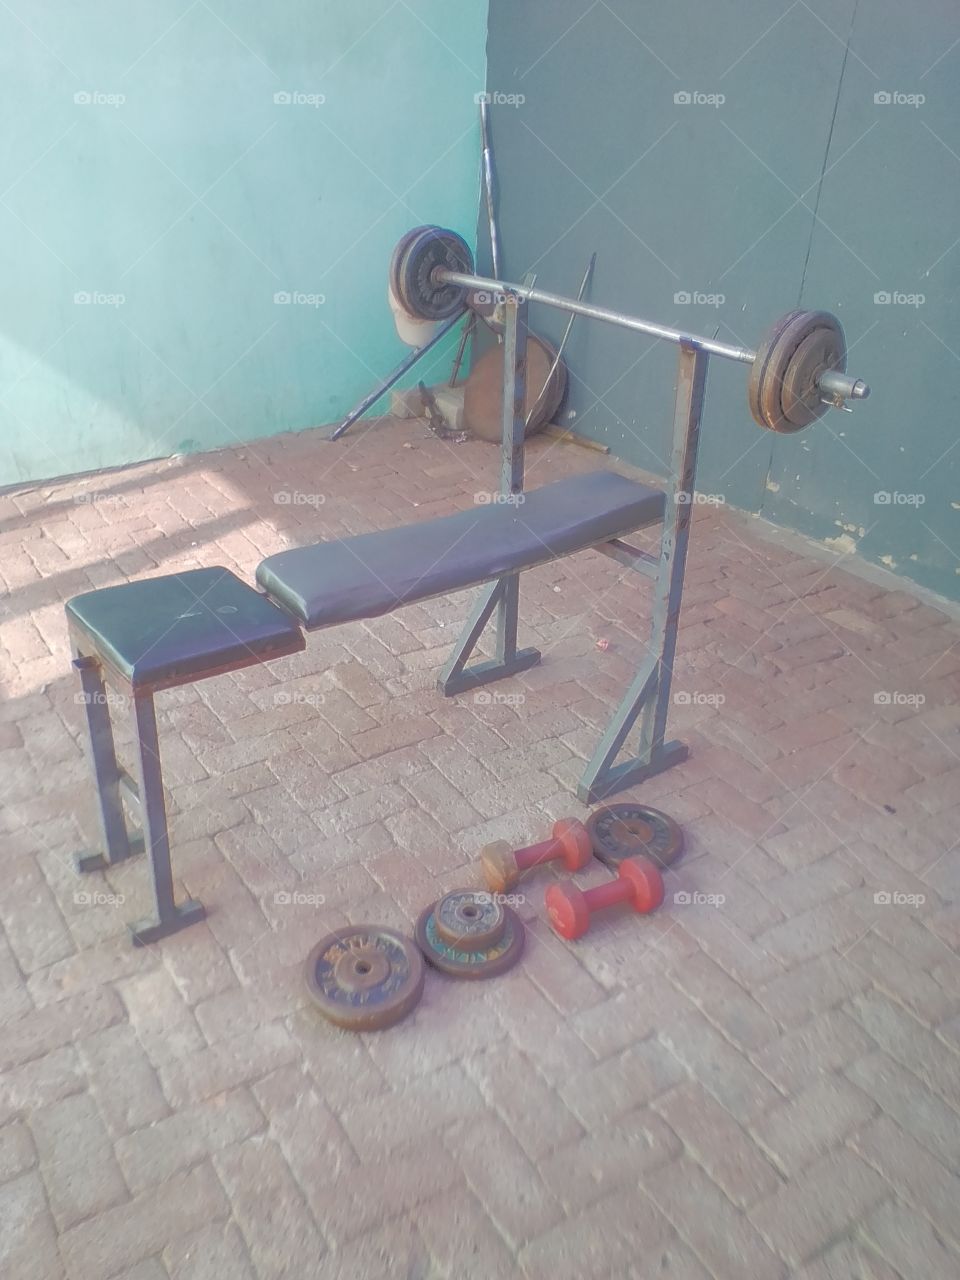 welcome to my hone gym tools